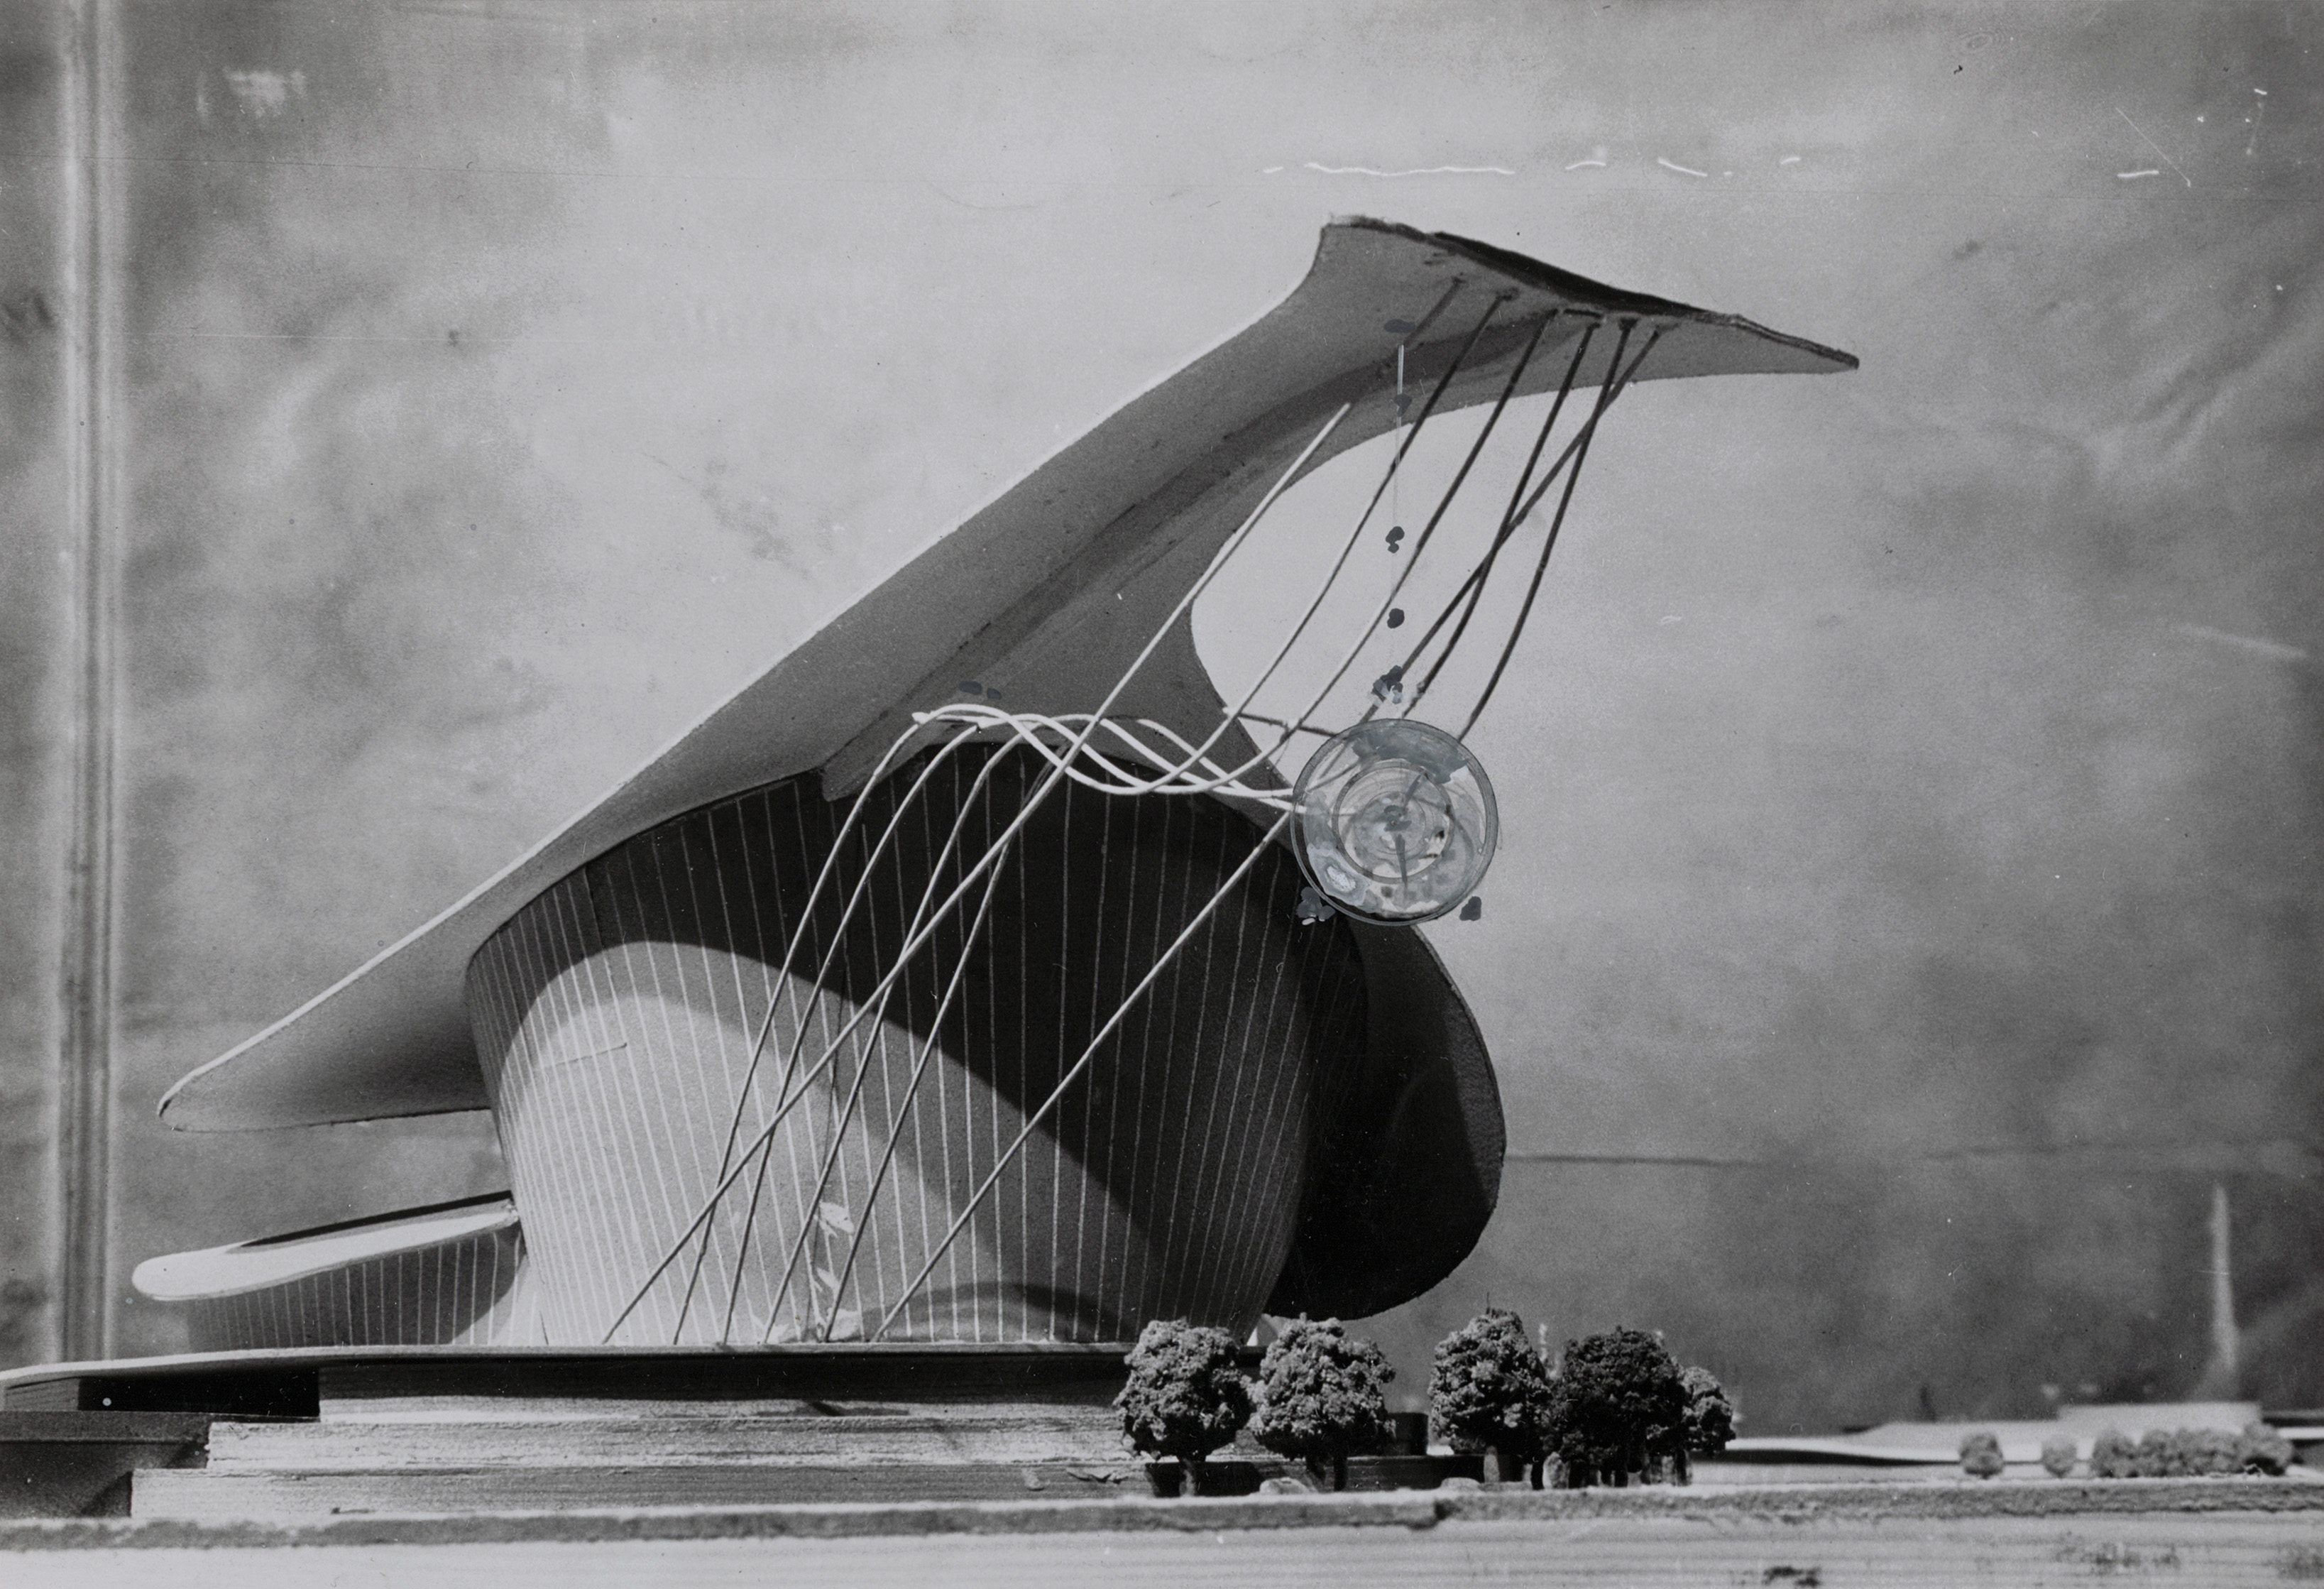 Sergius Ruegenberg, Urban planning competition "Around the Zoo" (not realized) - Model view of bus stop shelter, 1948